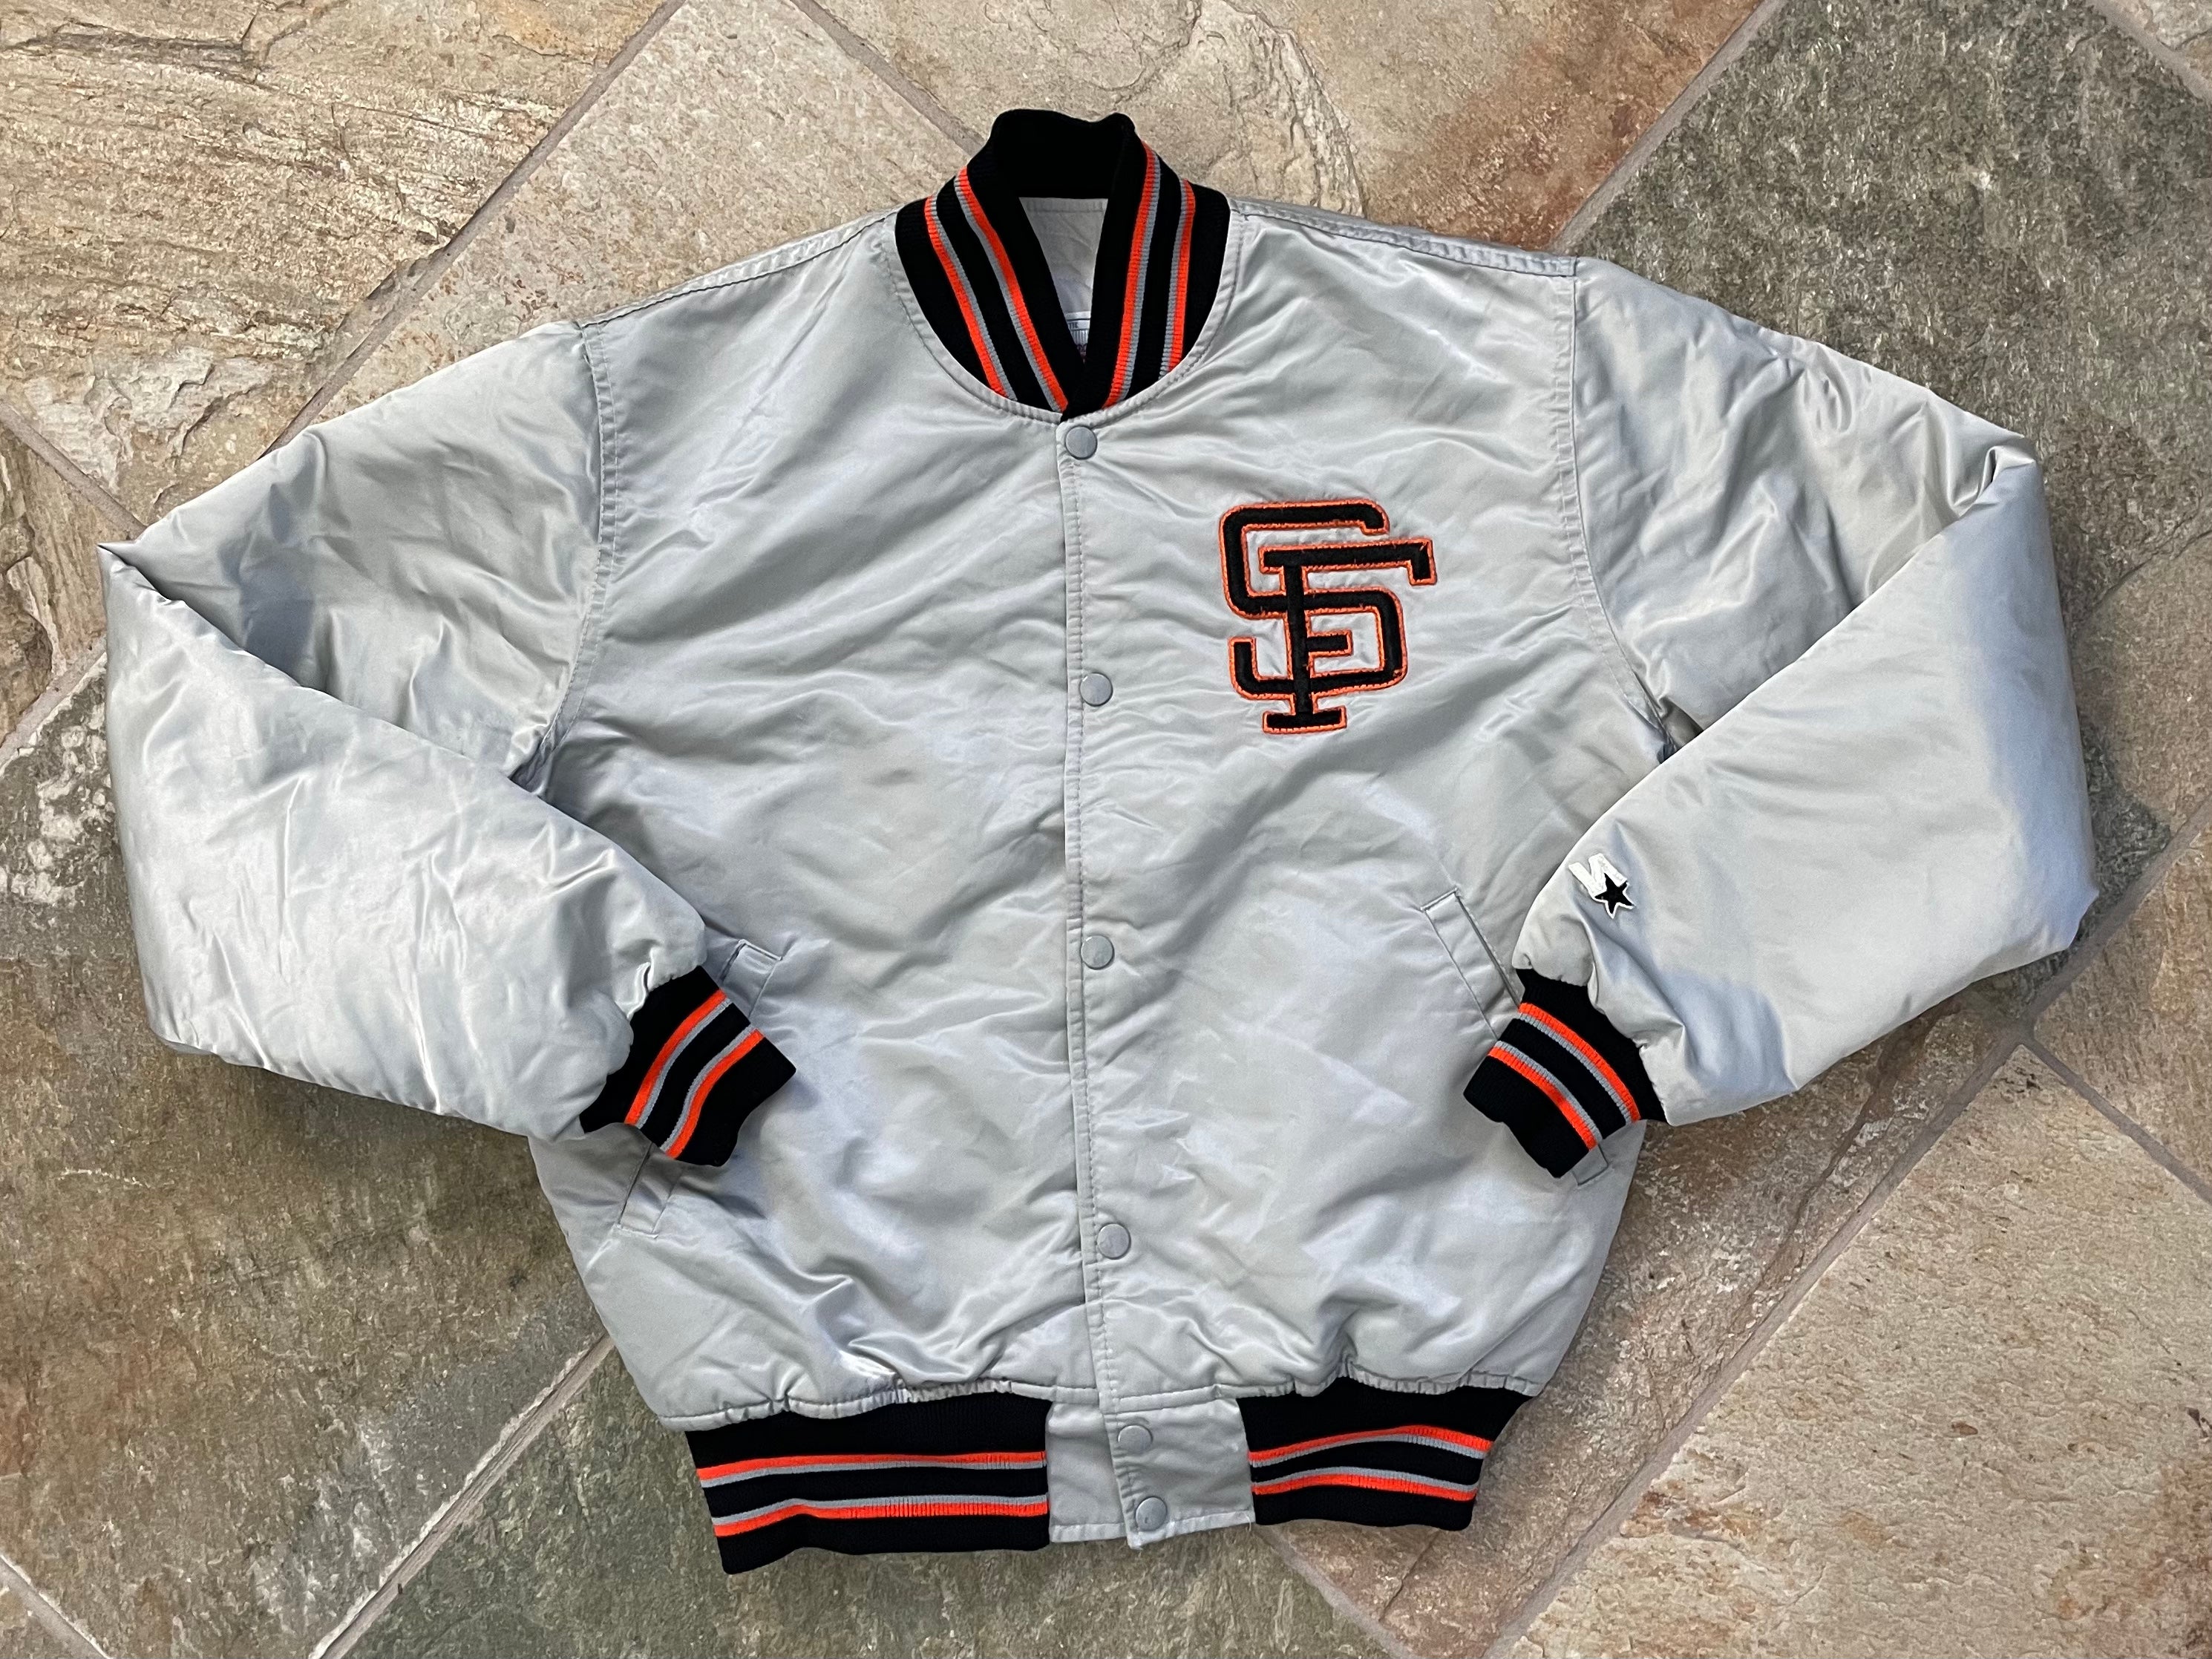 Baseball Style Jacket – Satin – Sf Giants – Embroidered Player Design